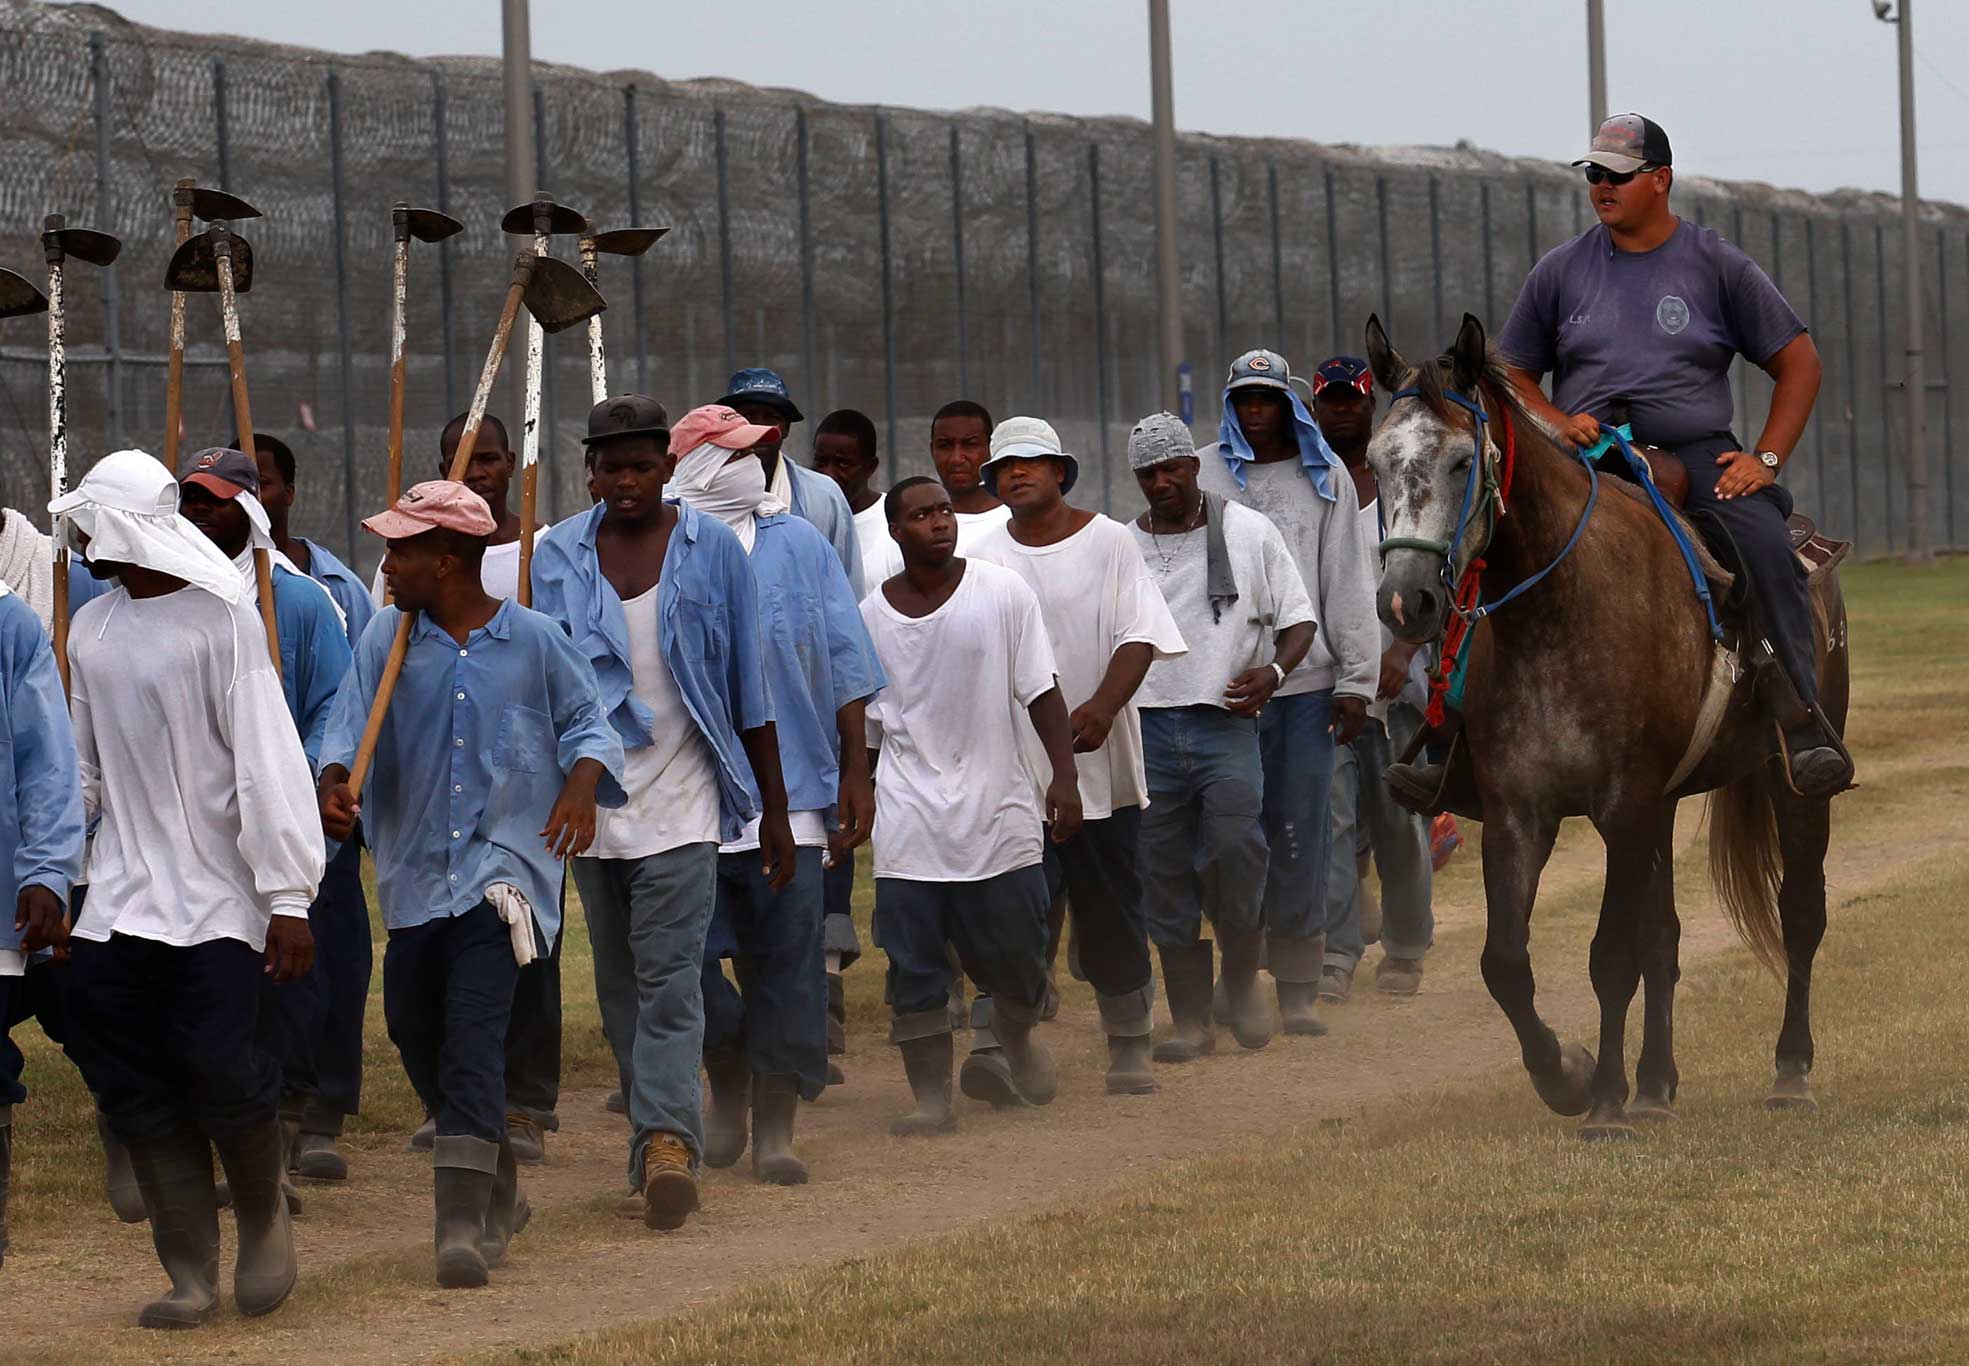 Read more: Perspectives From the Prison Where Slavery Never Ended